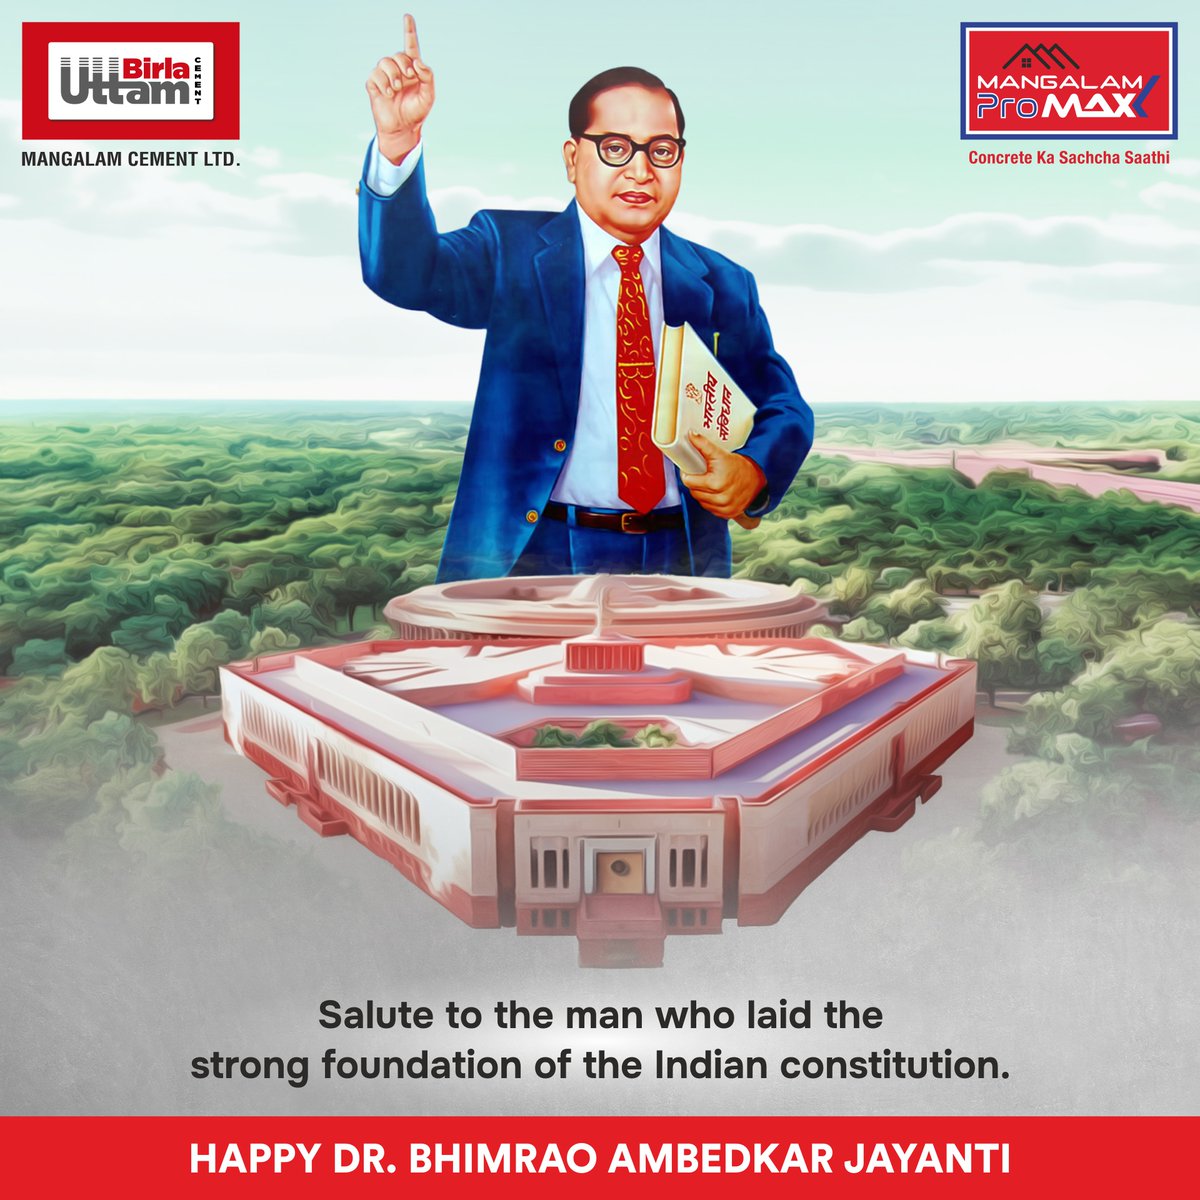 Saluting the architect of the Indian Constitution, Dr. #BRAmbedkar, on his birth anniversary! @MangalamCement pays tribute to his tireless efforts to shape a more inclusive & just society. Let's honor his legacy by striving for equality & empowerment for all.

#BRAmbedkarJayanti